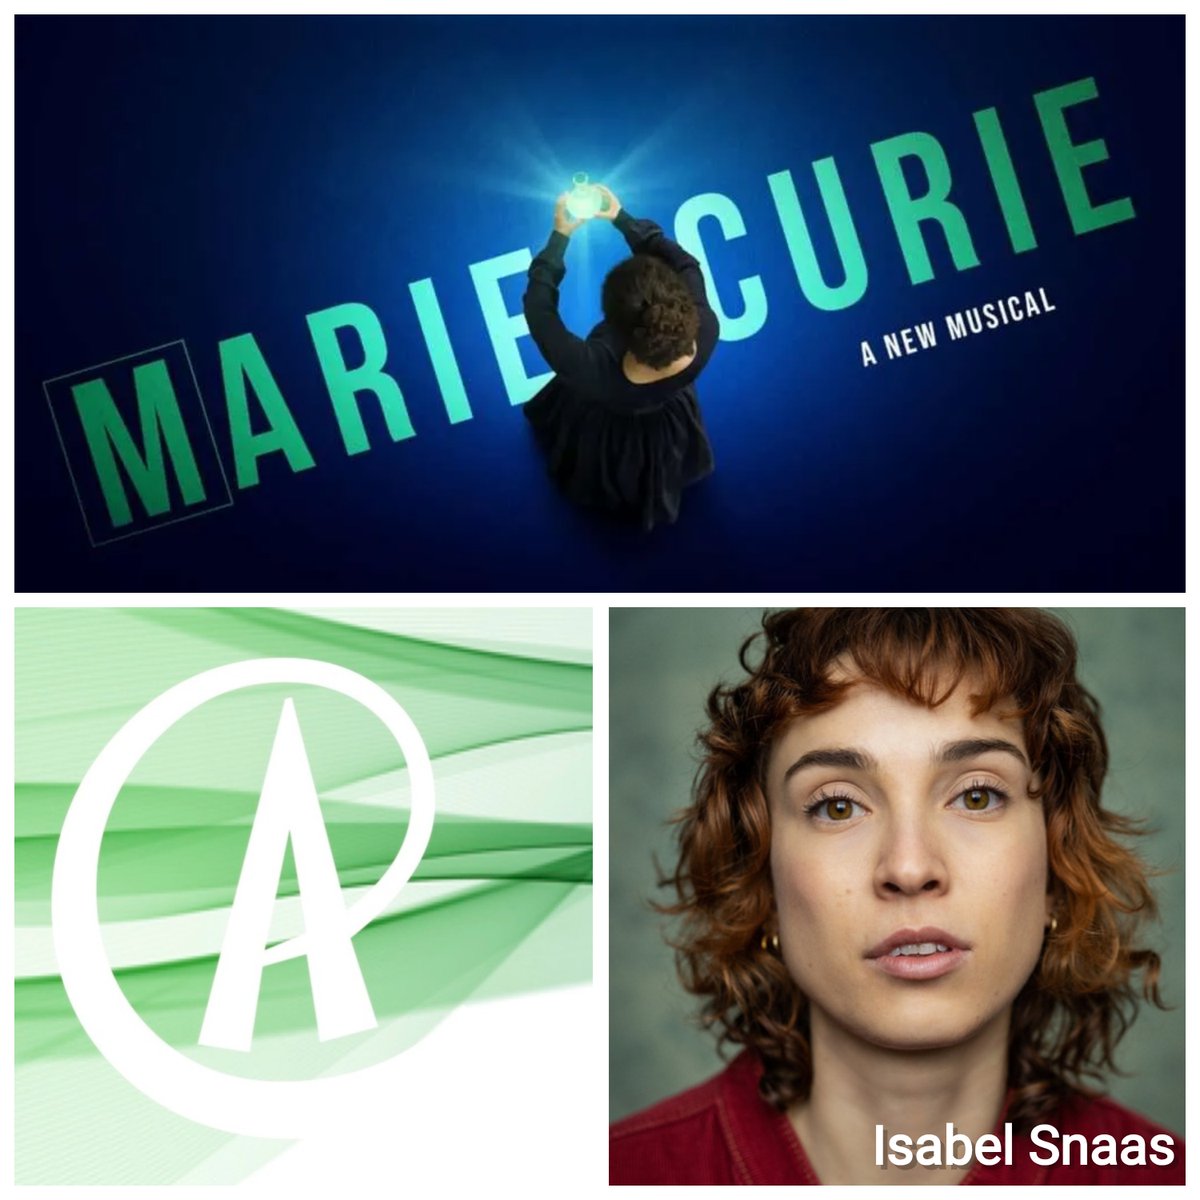 Congratulations to #IsabelSnaas who will appear in #MarieCurie @CharingCrossThr playing from 1 June until 28 July. Casting by @JaneDeitch charingcrosstheatre.co.uk/theatre/marie-…